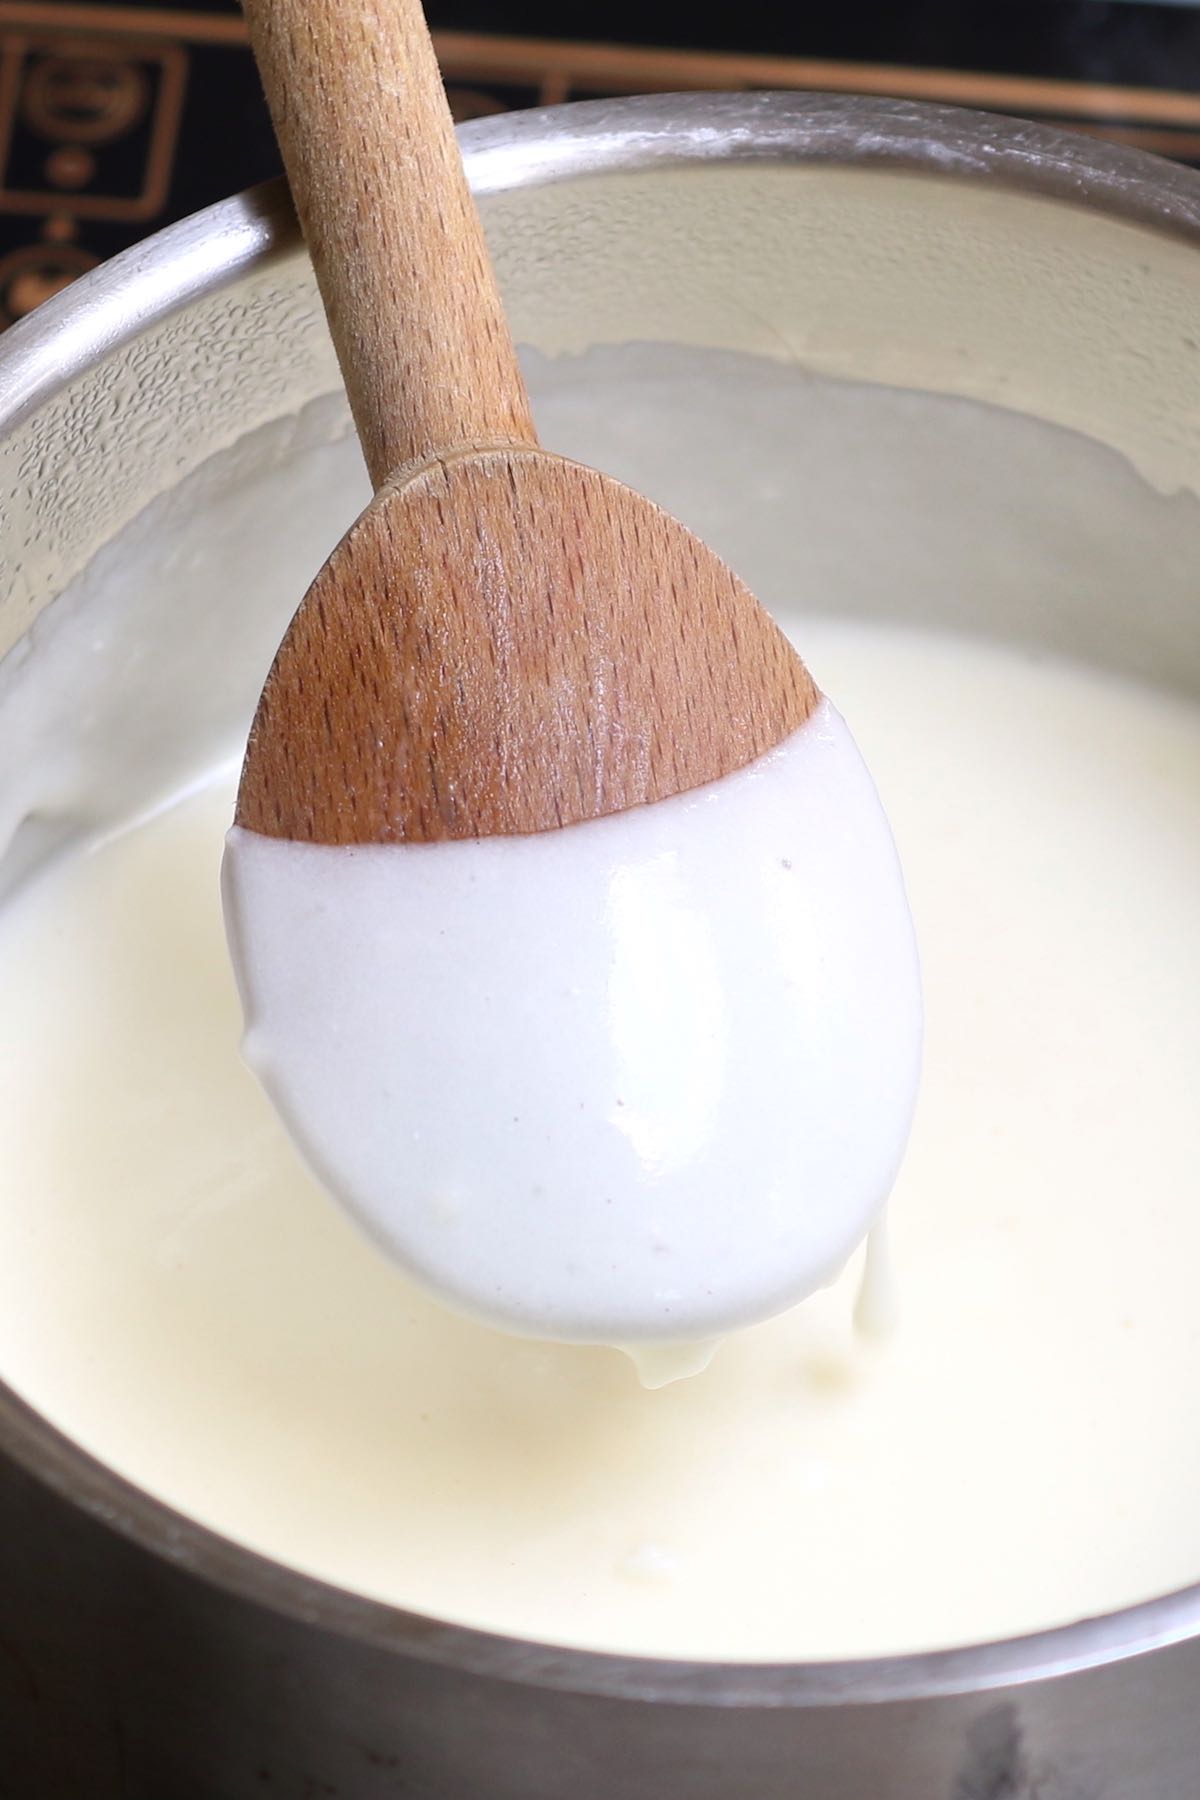 Bechamel sauce coating the back of a wooden spoon once thickened